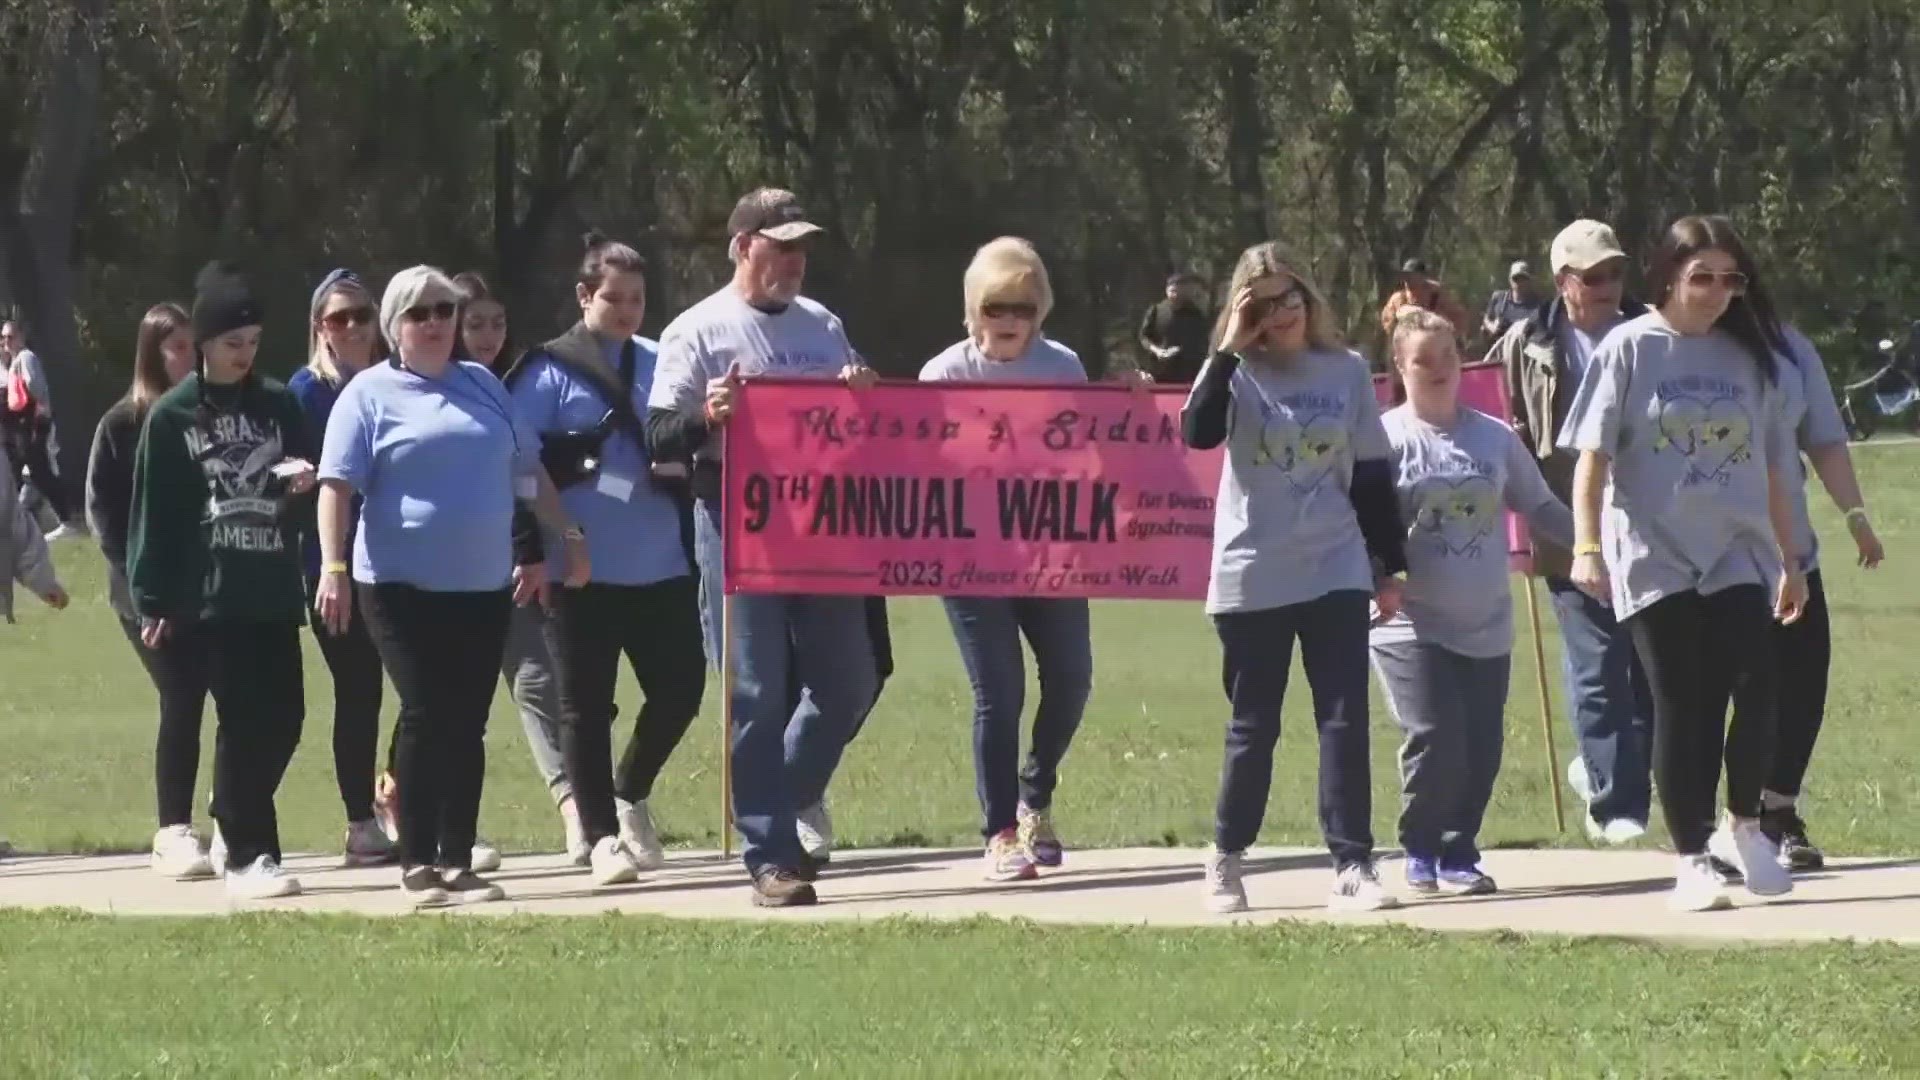 The Heart of Texas Down Syndrome Network held their 9th annual walk in Hewitt Park.